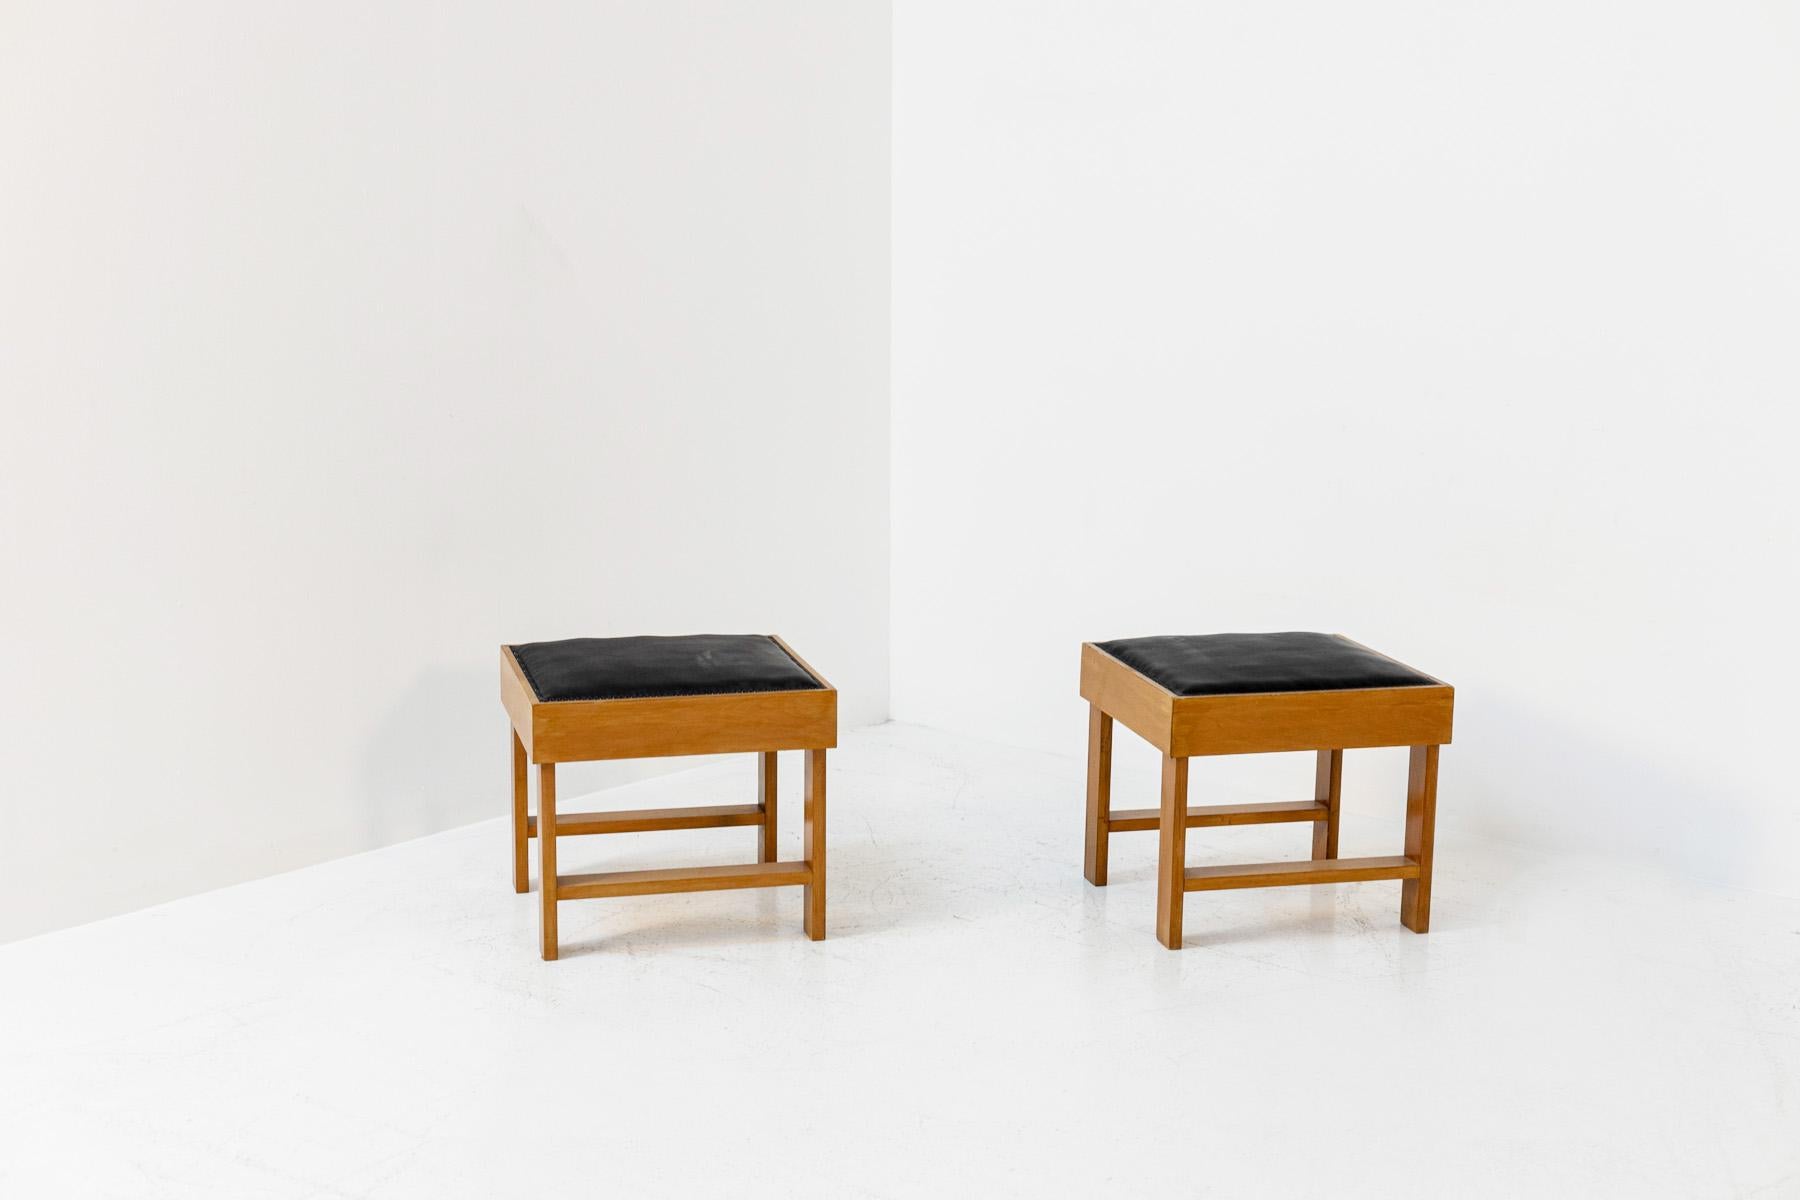 Beautiful Italian stools attr. to BBPR from the 1950s.
The two BBPR stools were made with fine pear wood for the frame, while the seat is lined with black faux leather and attached through black painted metal studs.
The stools have been restored